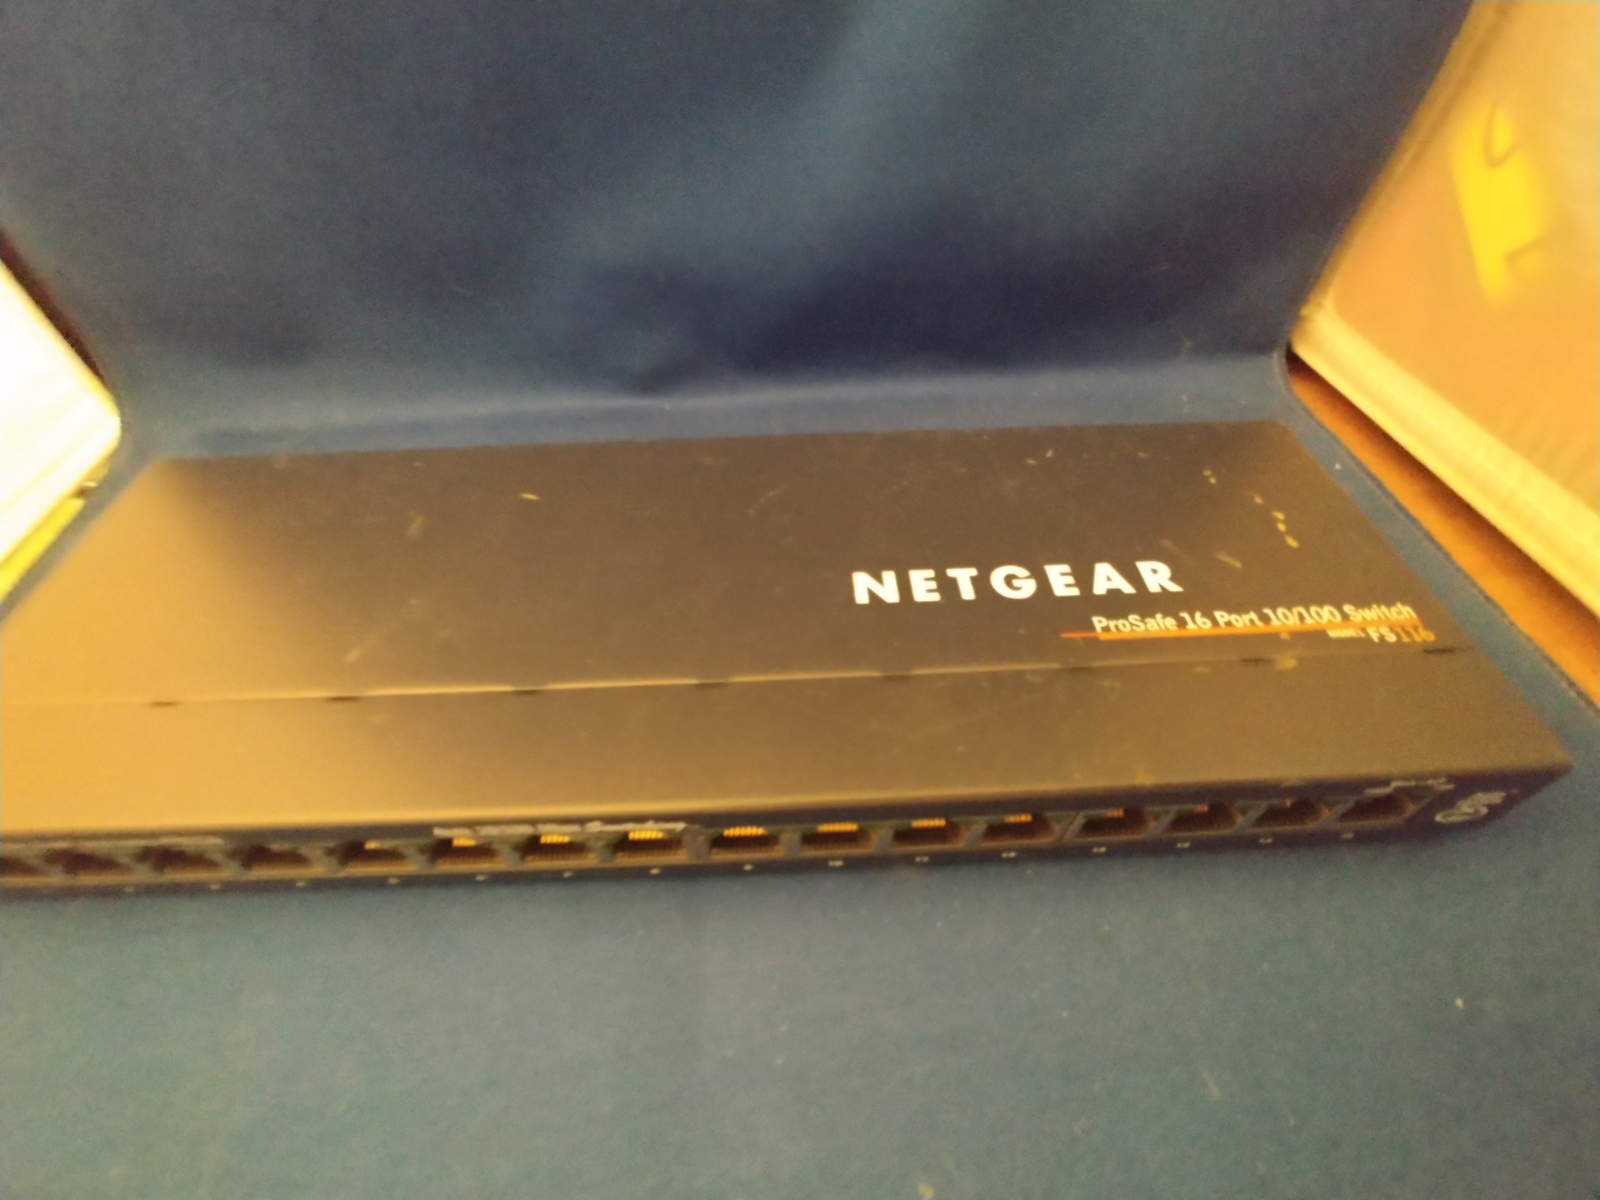 Primary image for Netgear Prosafe 16 Port 10/100 Ethernet Switch Model: FS116 Includes PWR adapter